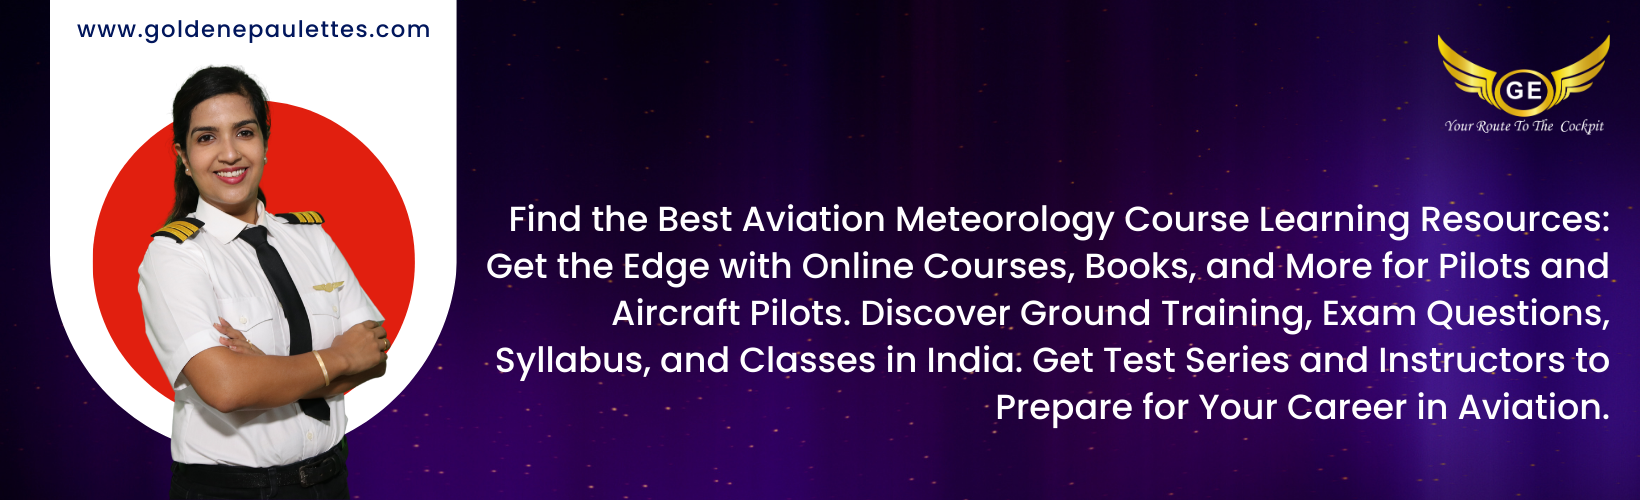 Aviation Meteorology Course Learning Resources